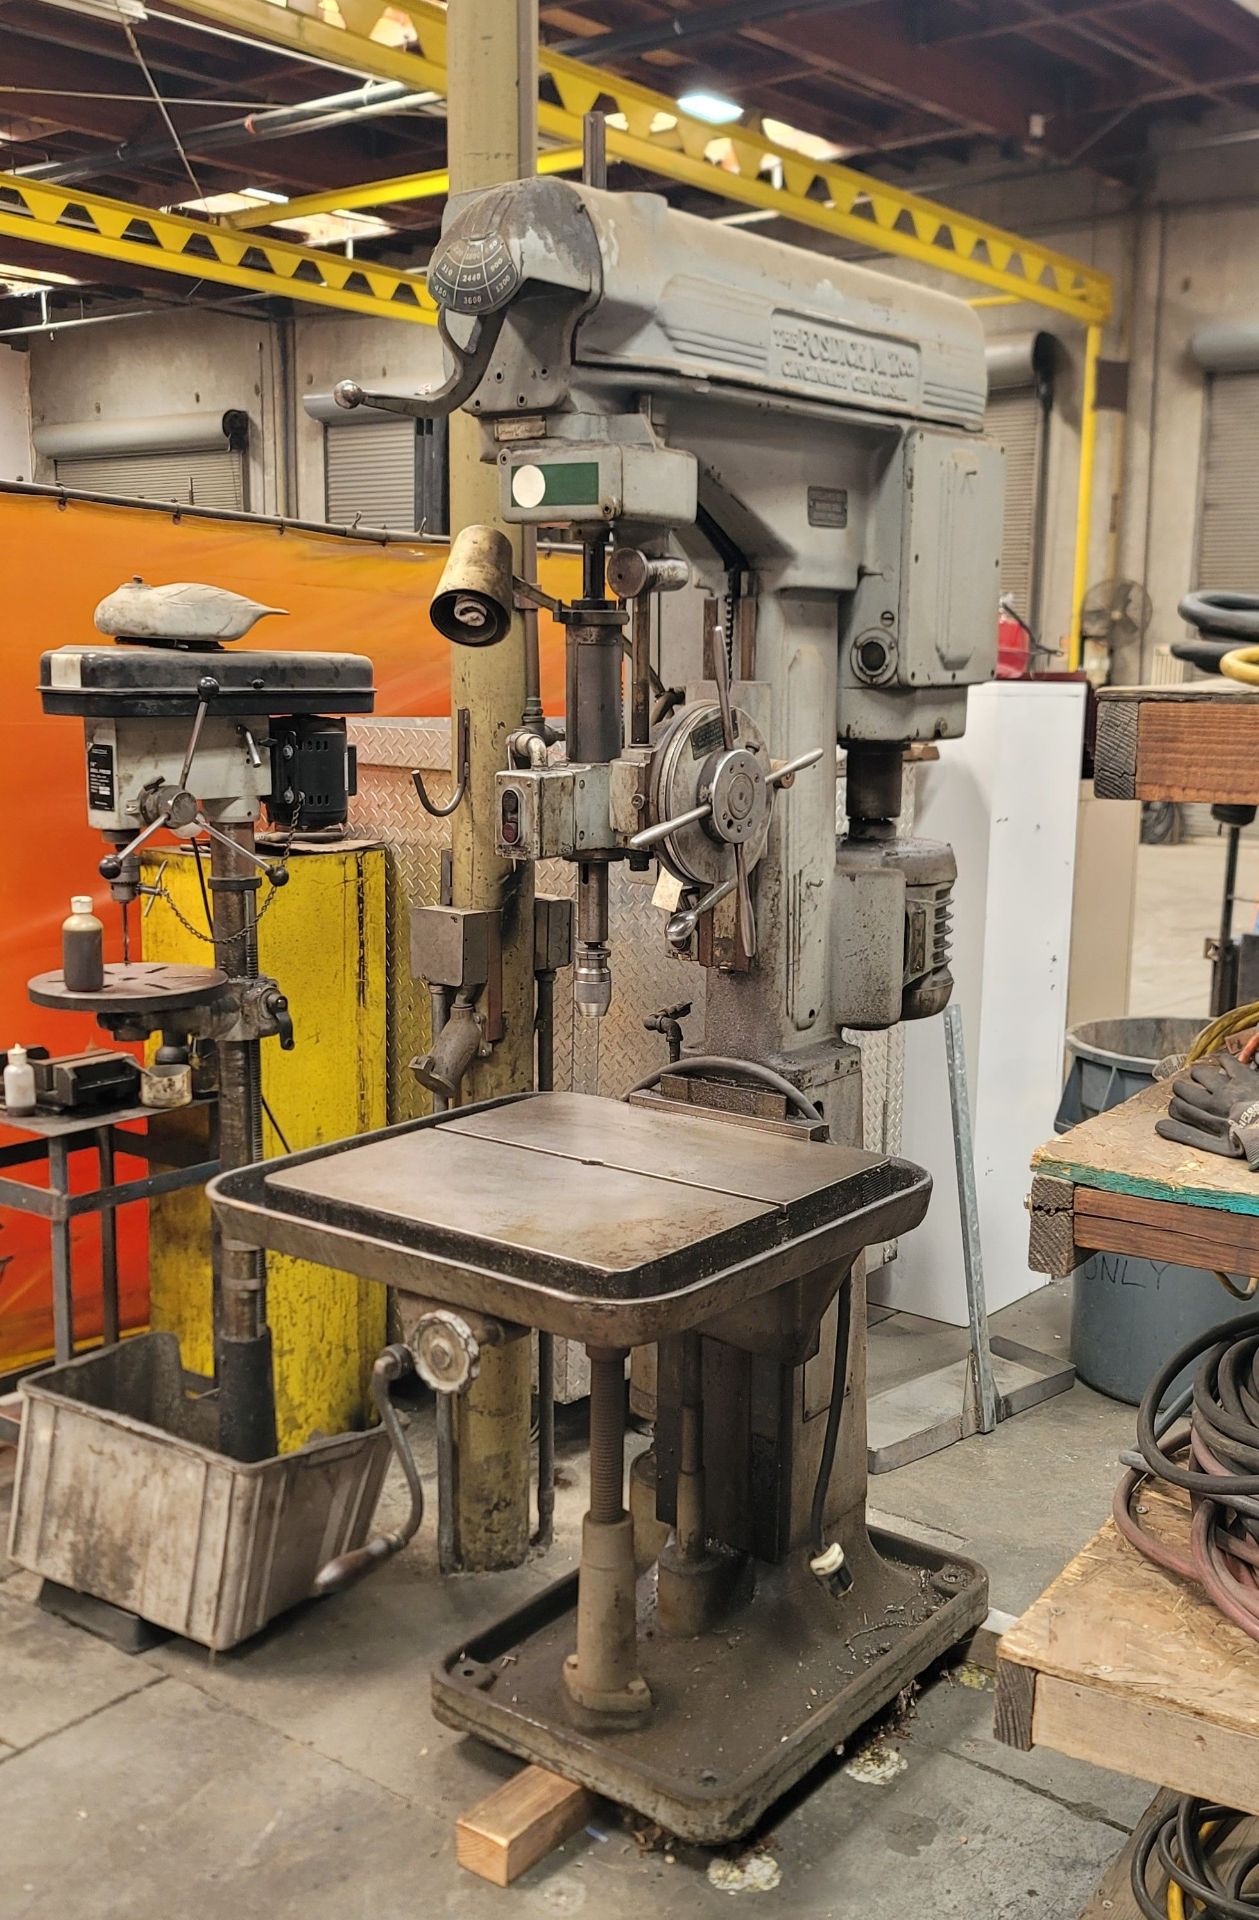 FOSDICK VERTICAL BORING MACHINE, 9-SPEED, 2' X 2' TABLE W/ COOLANT CHANNEL, LARGE TAPERED DRILLS, - Image 2 of 6